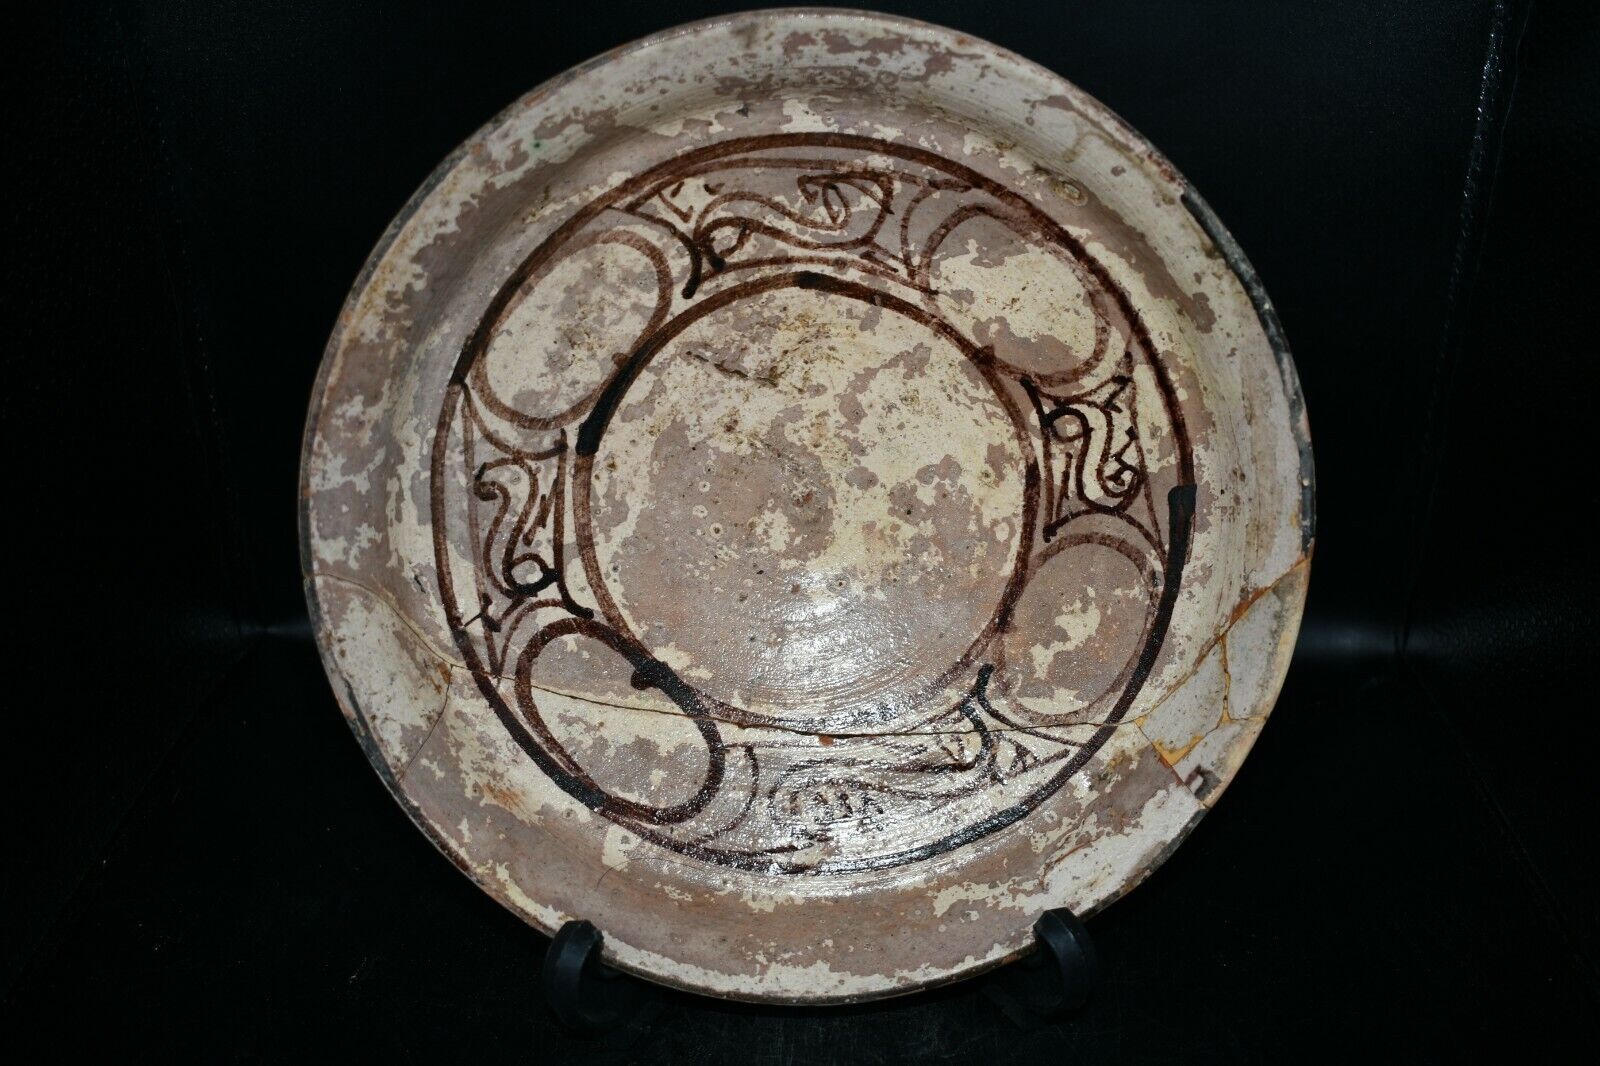 Large Authentic Ancient Islamic Ceramic Plate from Ancient Near Eastern Nishapur